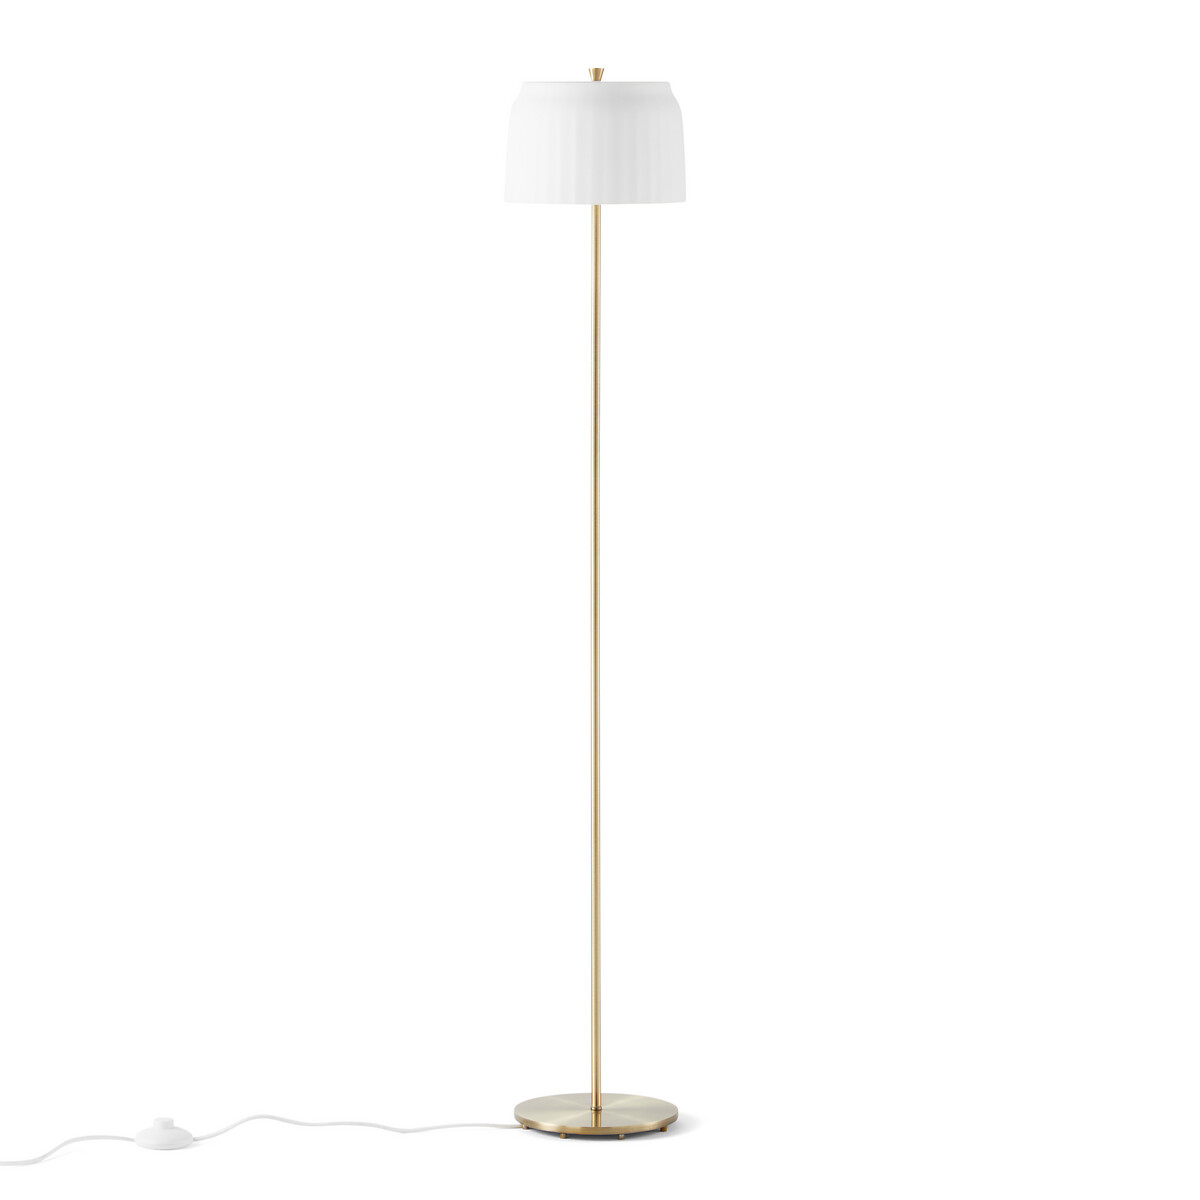 Canelé Frosted Glass Floor Lamp Opaline, Floor Lamp Parts Glass